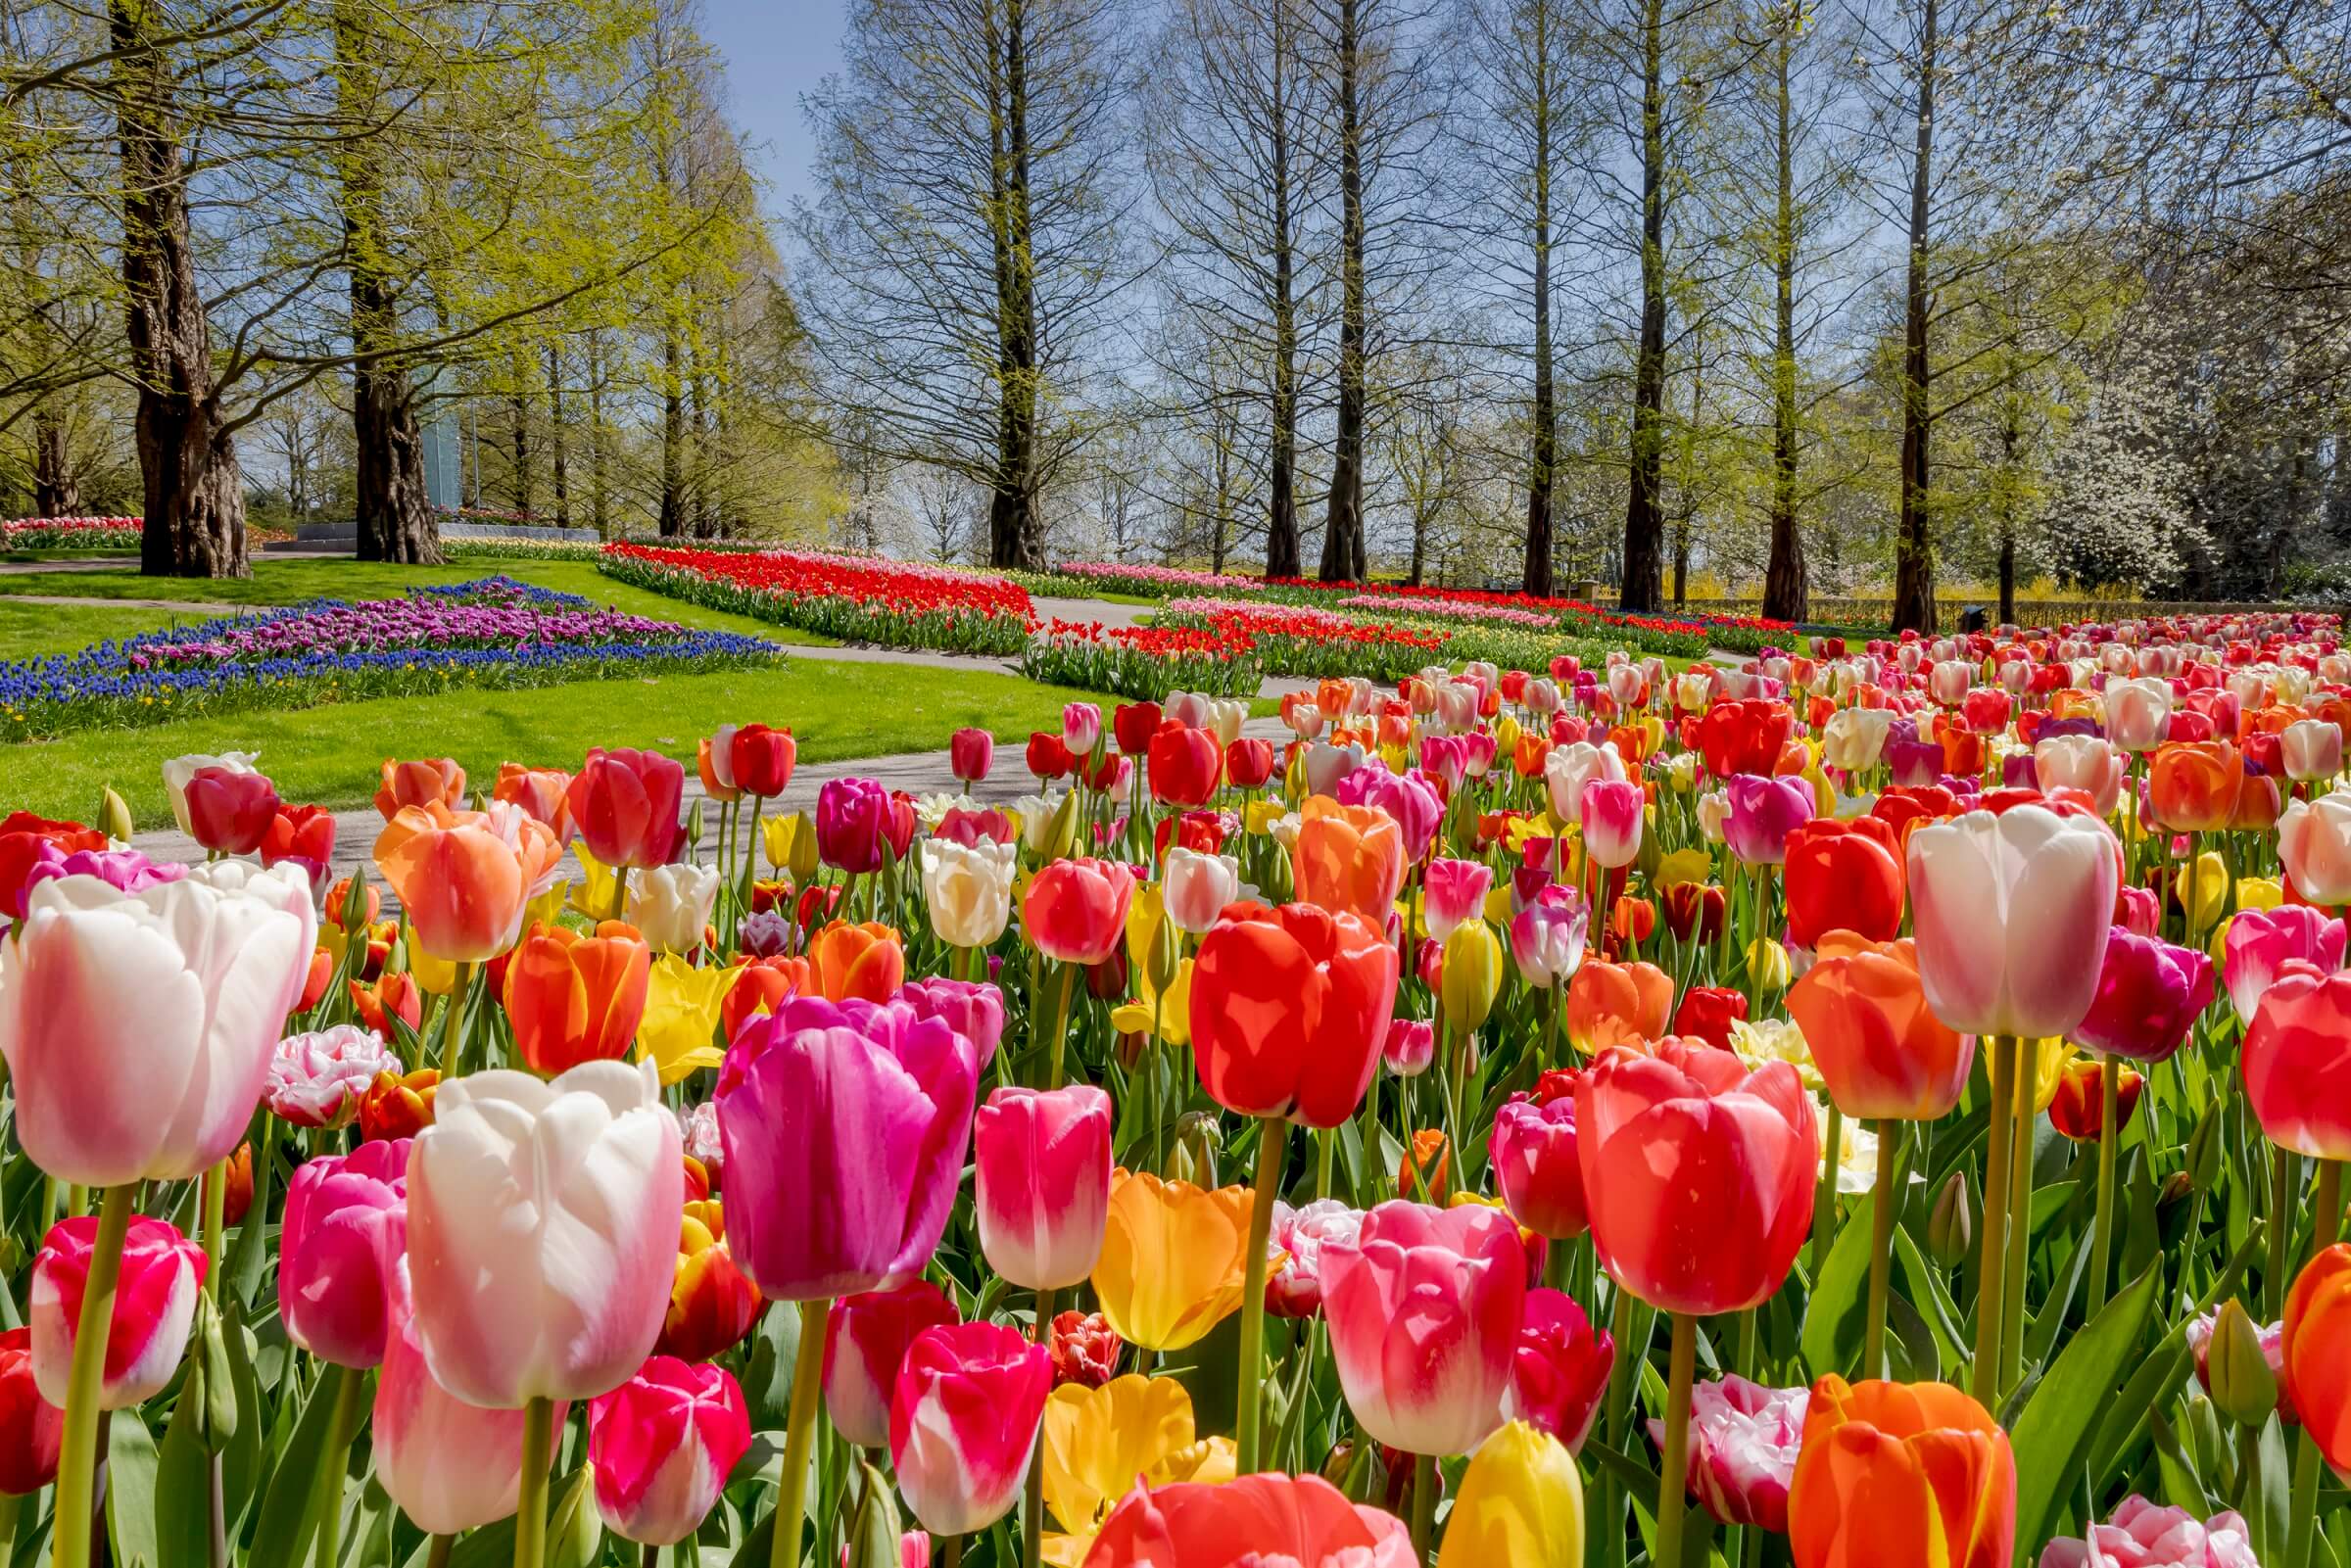 How to See the Tulips in Amsterdam TouristSecrets